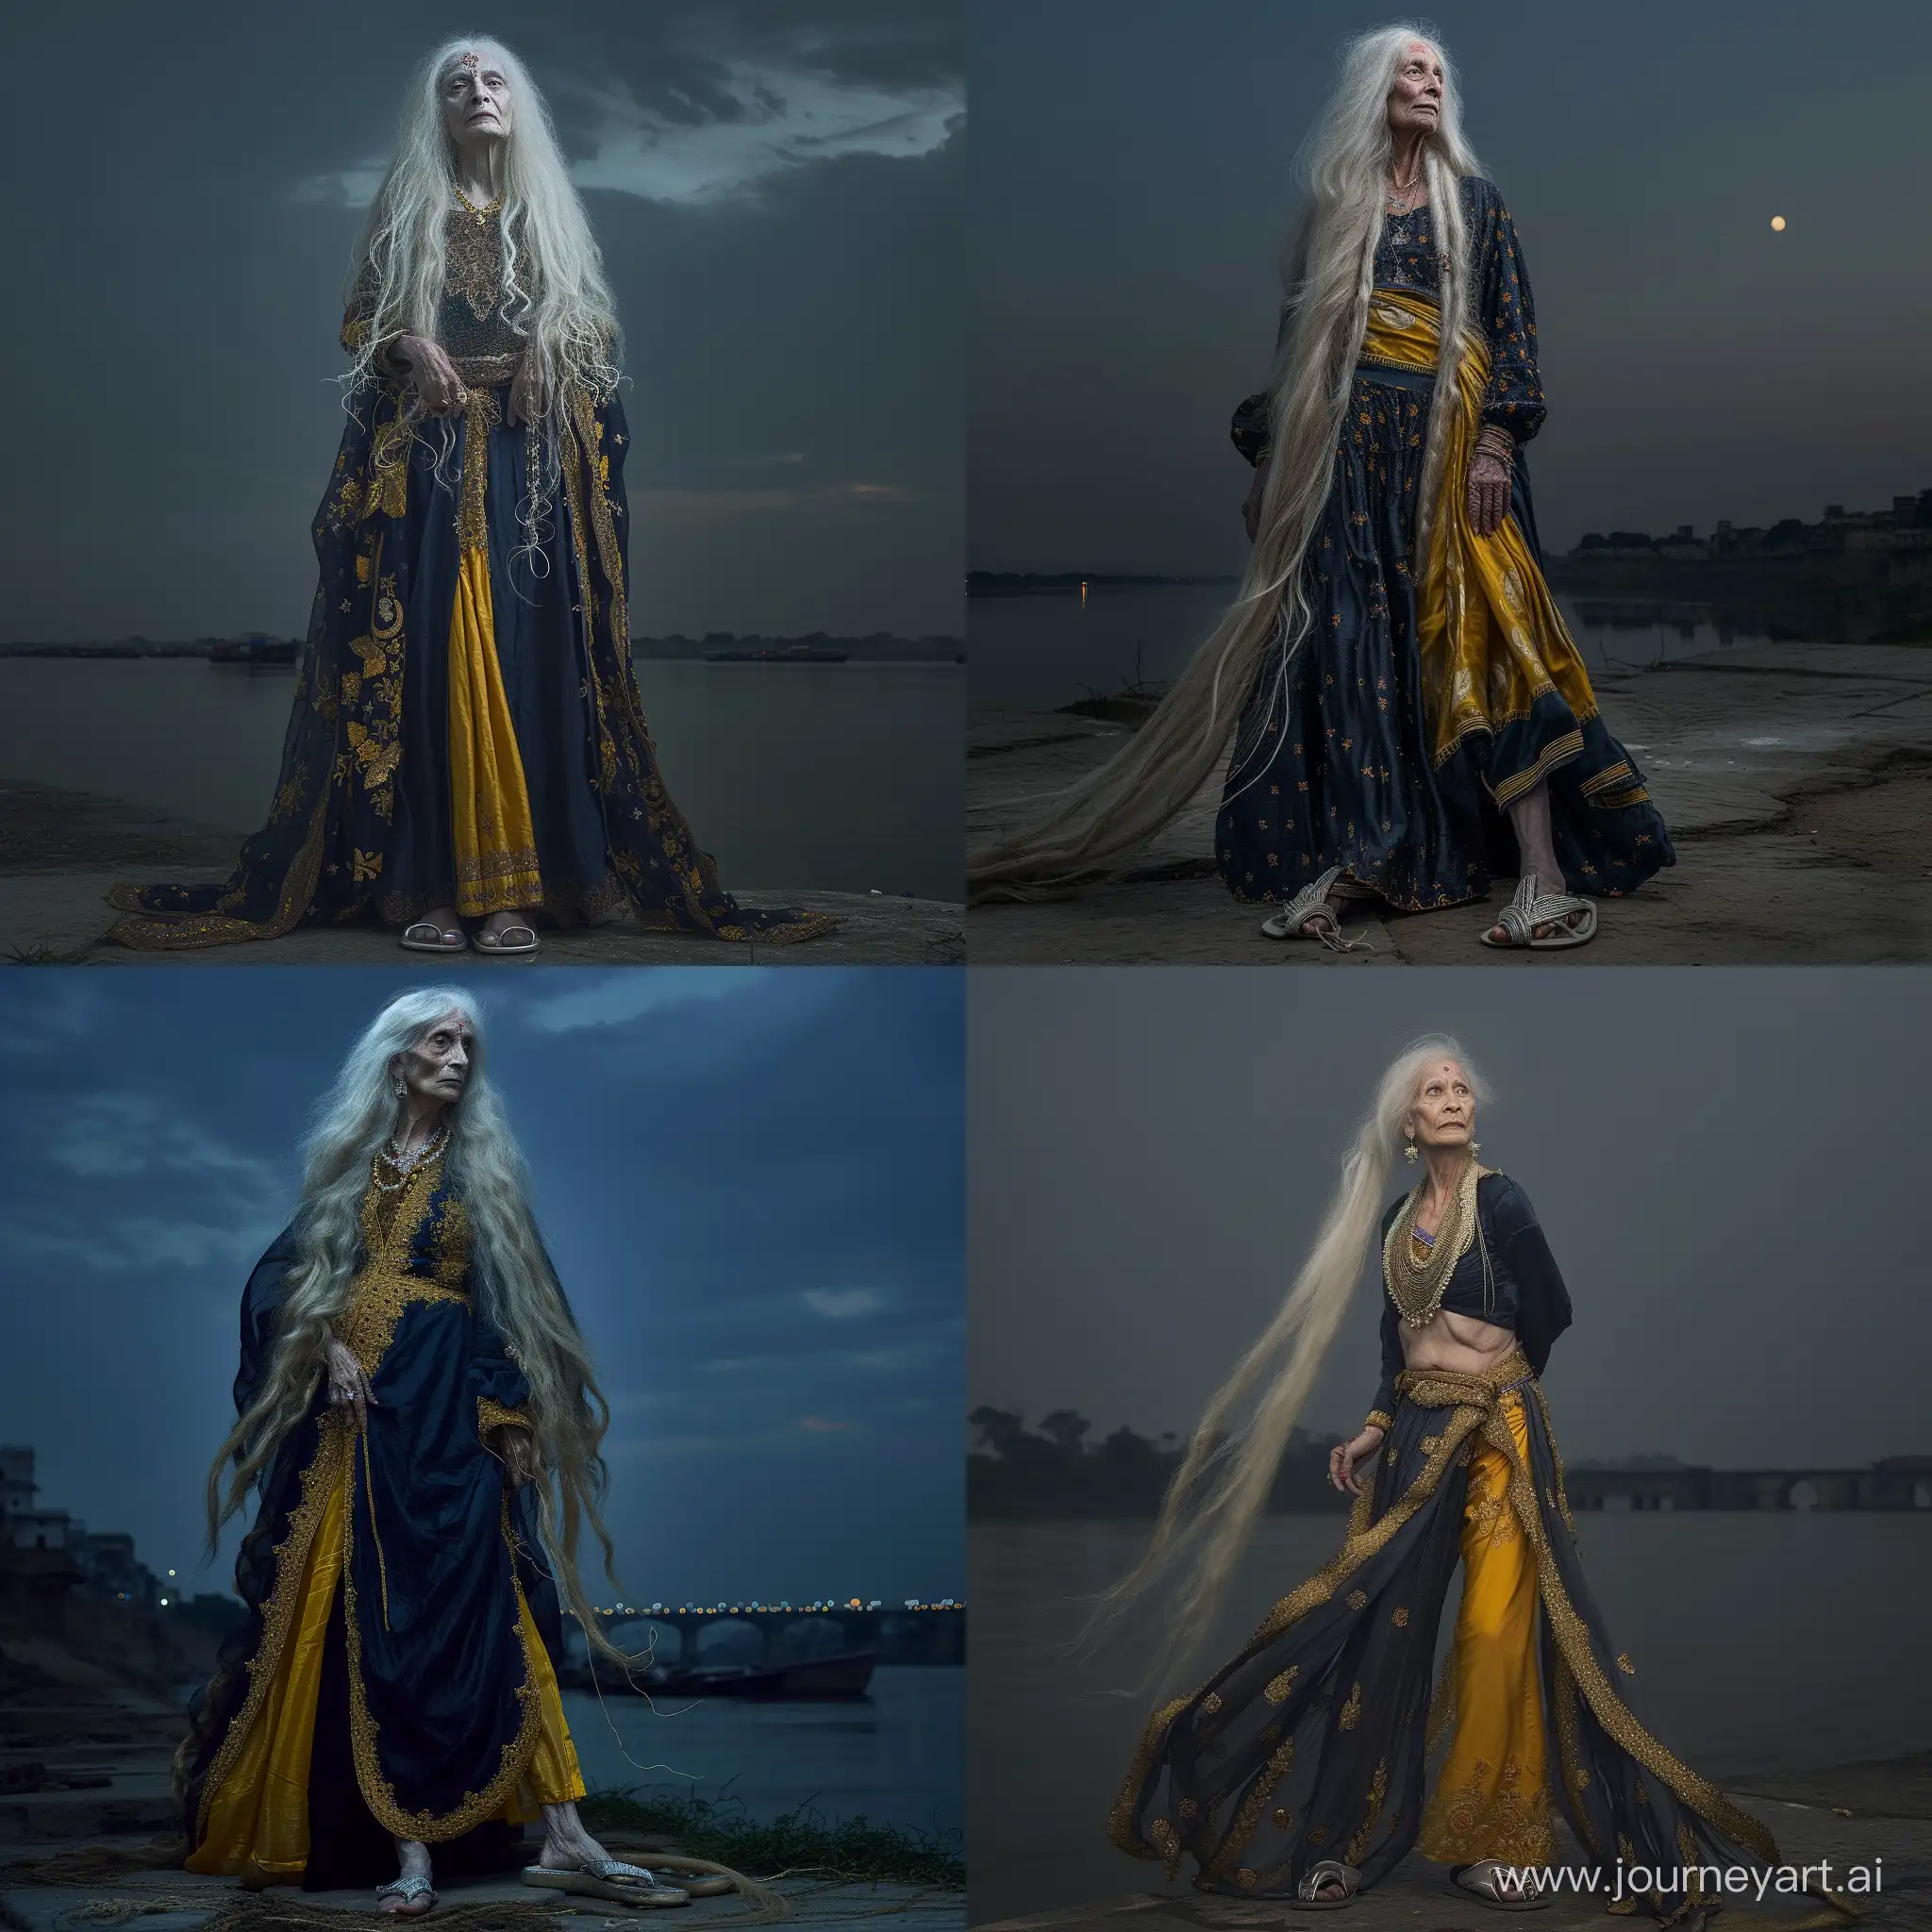     80 years  very skiny old hippie  women very long whit hair      wearing a dark bleu dress with gold  and  yellow wide trouser and silver sandels     is standing before ganges river by dark sky  
    india  soft contrast  total body  low angle 35mm fuji xt4 fotorealistisch